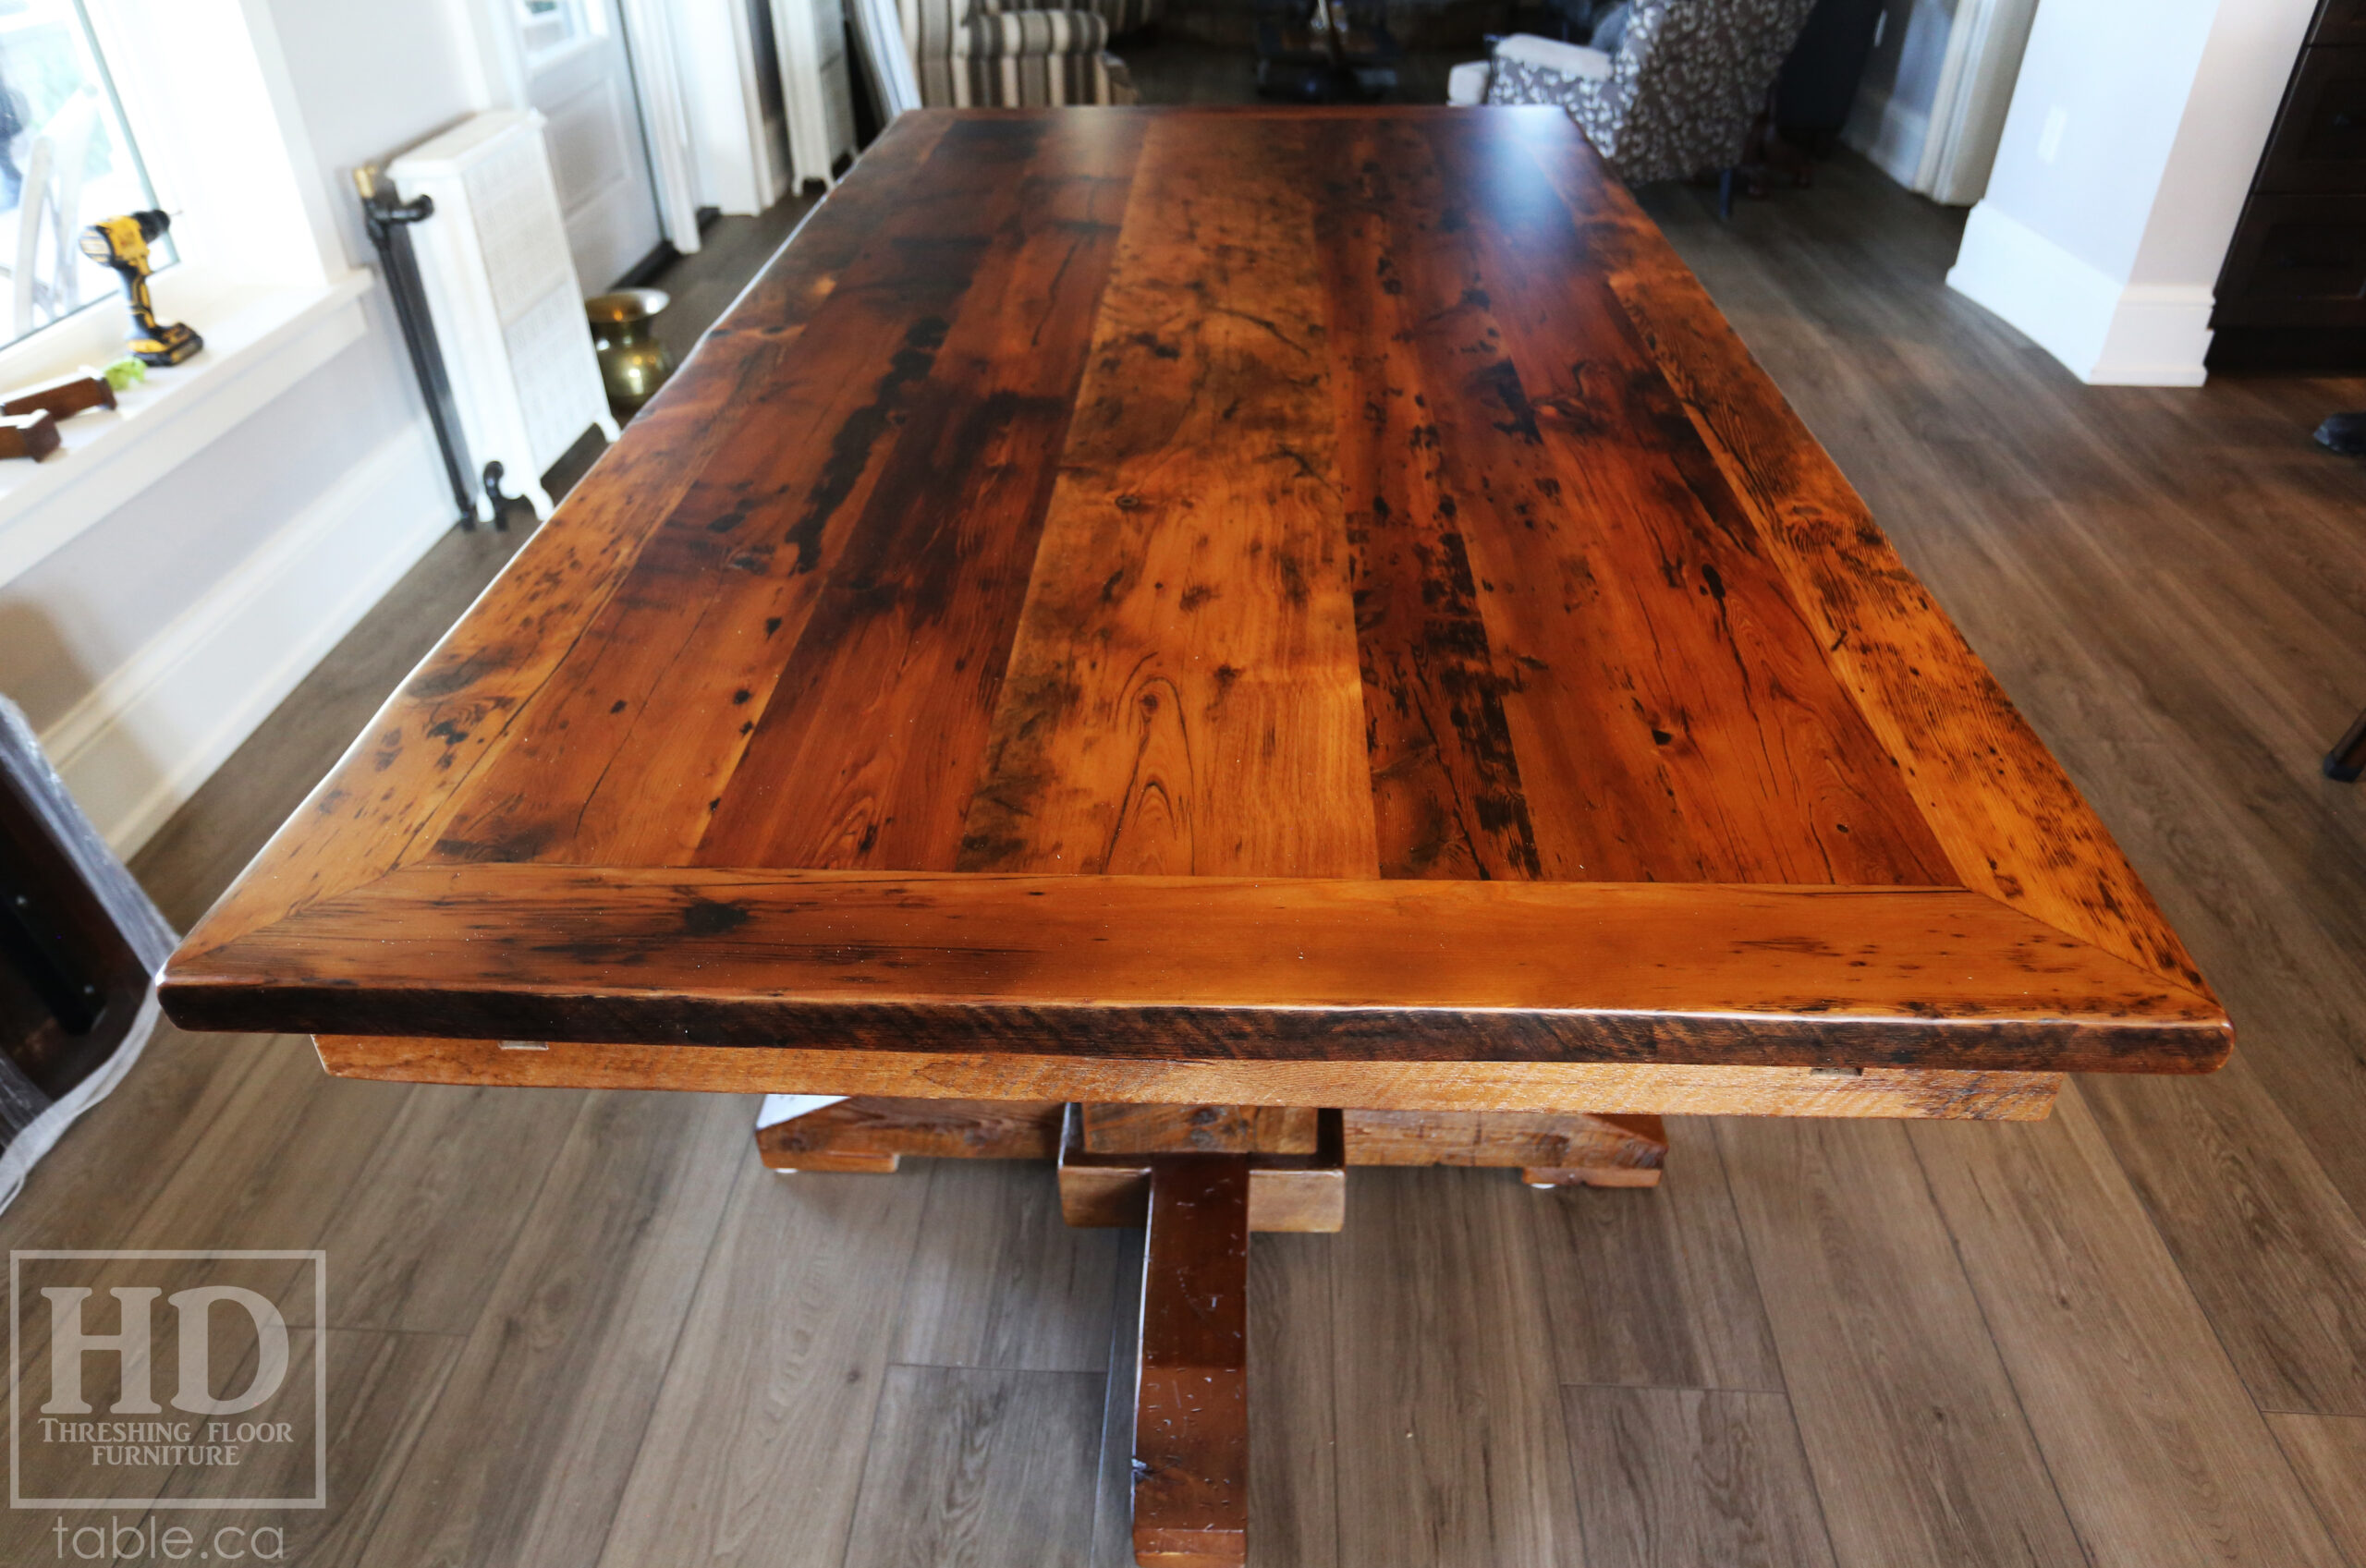 8’ Reclaimed Ontario Barnwood Table we made for a Beamsville, Ontario home – 48” wide –  Hand Hewn Pedestals Base - Old Growth Hemlock Threshing Floor Construction - Original edges & distressing maintained – Bread Edge Ends – Premium epoxy + matte polyurethane finish – [2] 18” leaf extensions – [2] Drawers – Lee Valley Hardware Cast Brass Handle - www.table.ca